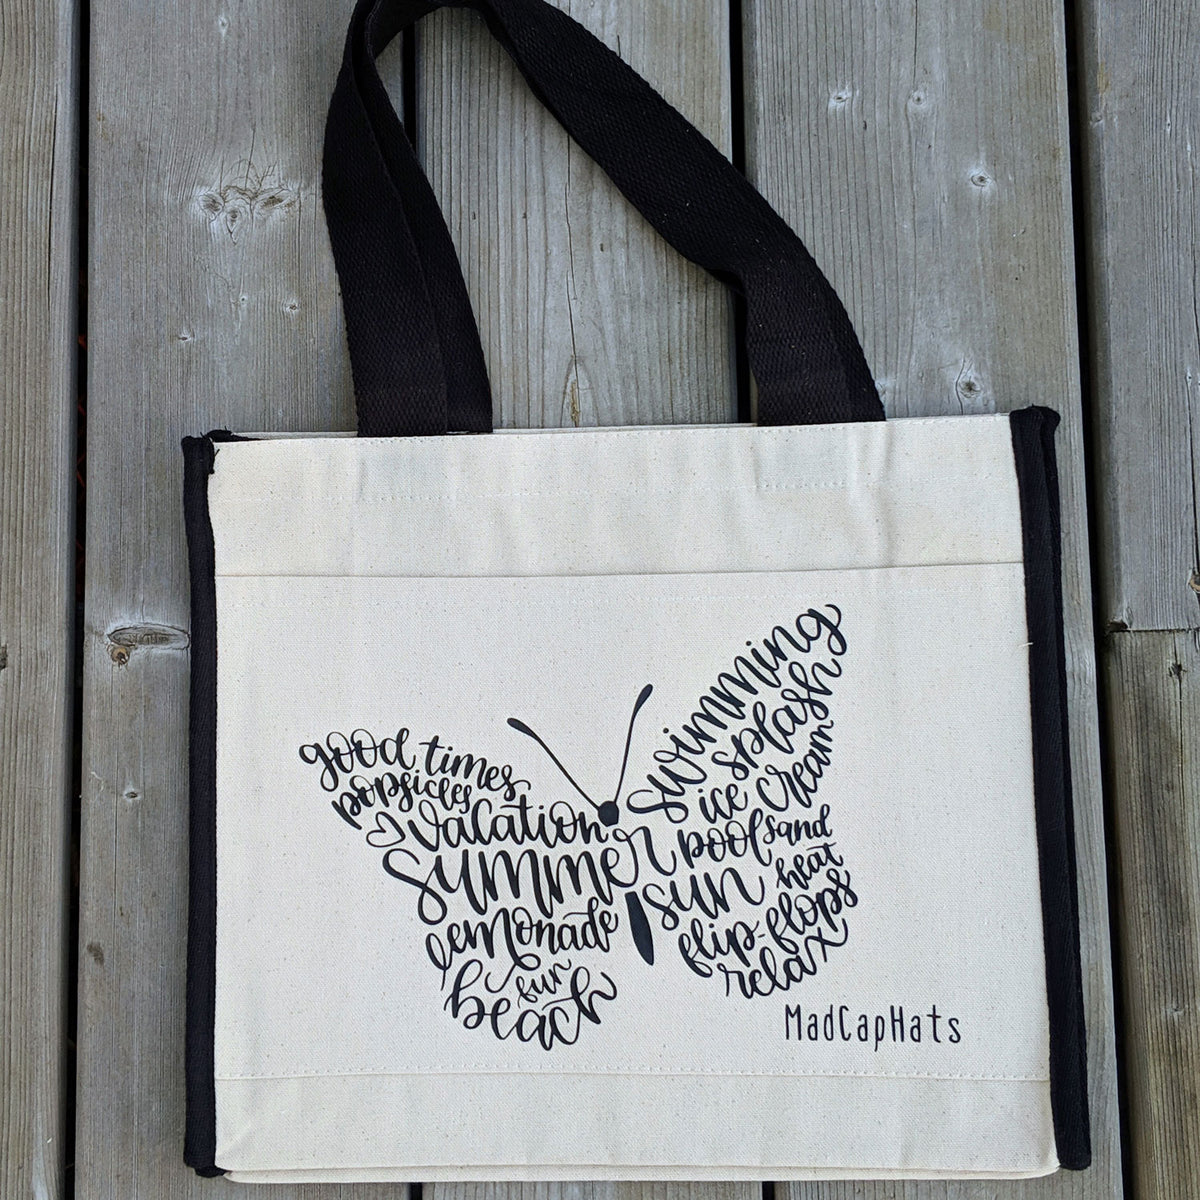 Butterfly days of summer Cotton Canvas Tote Bag